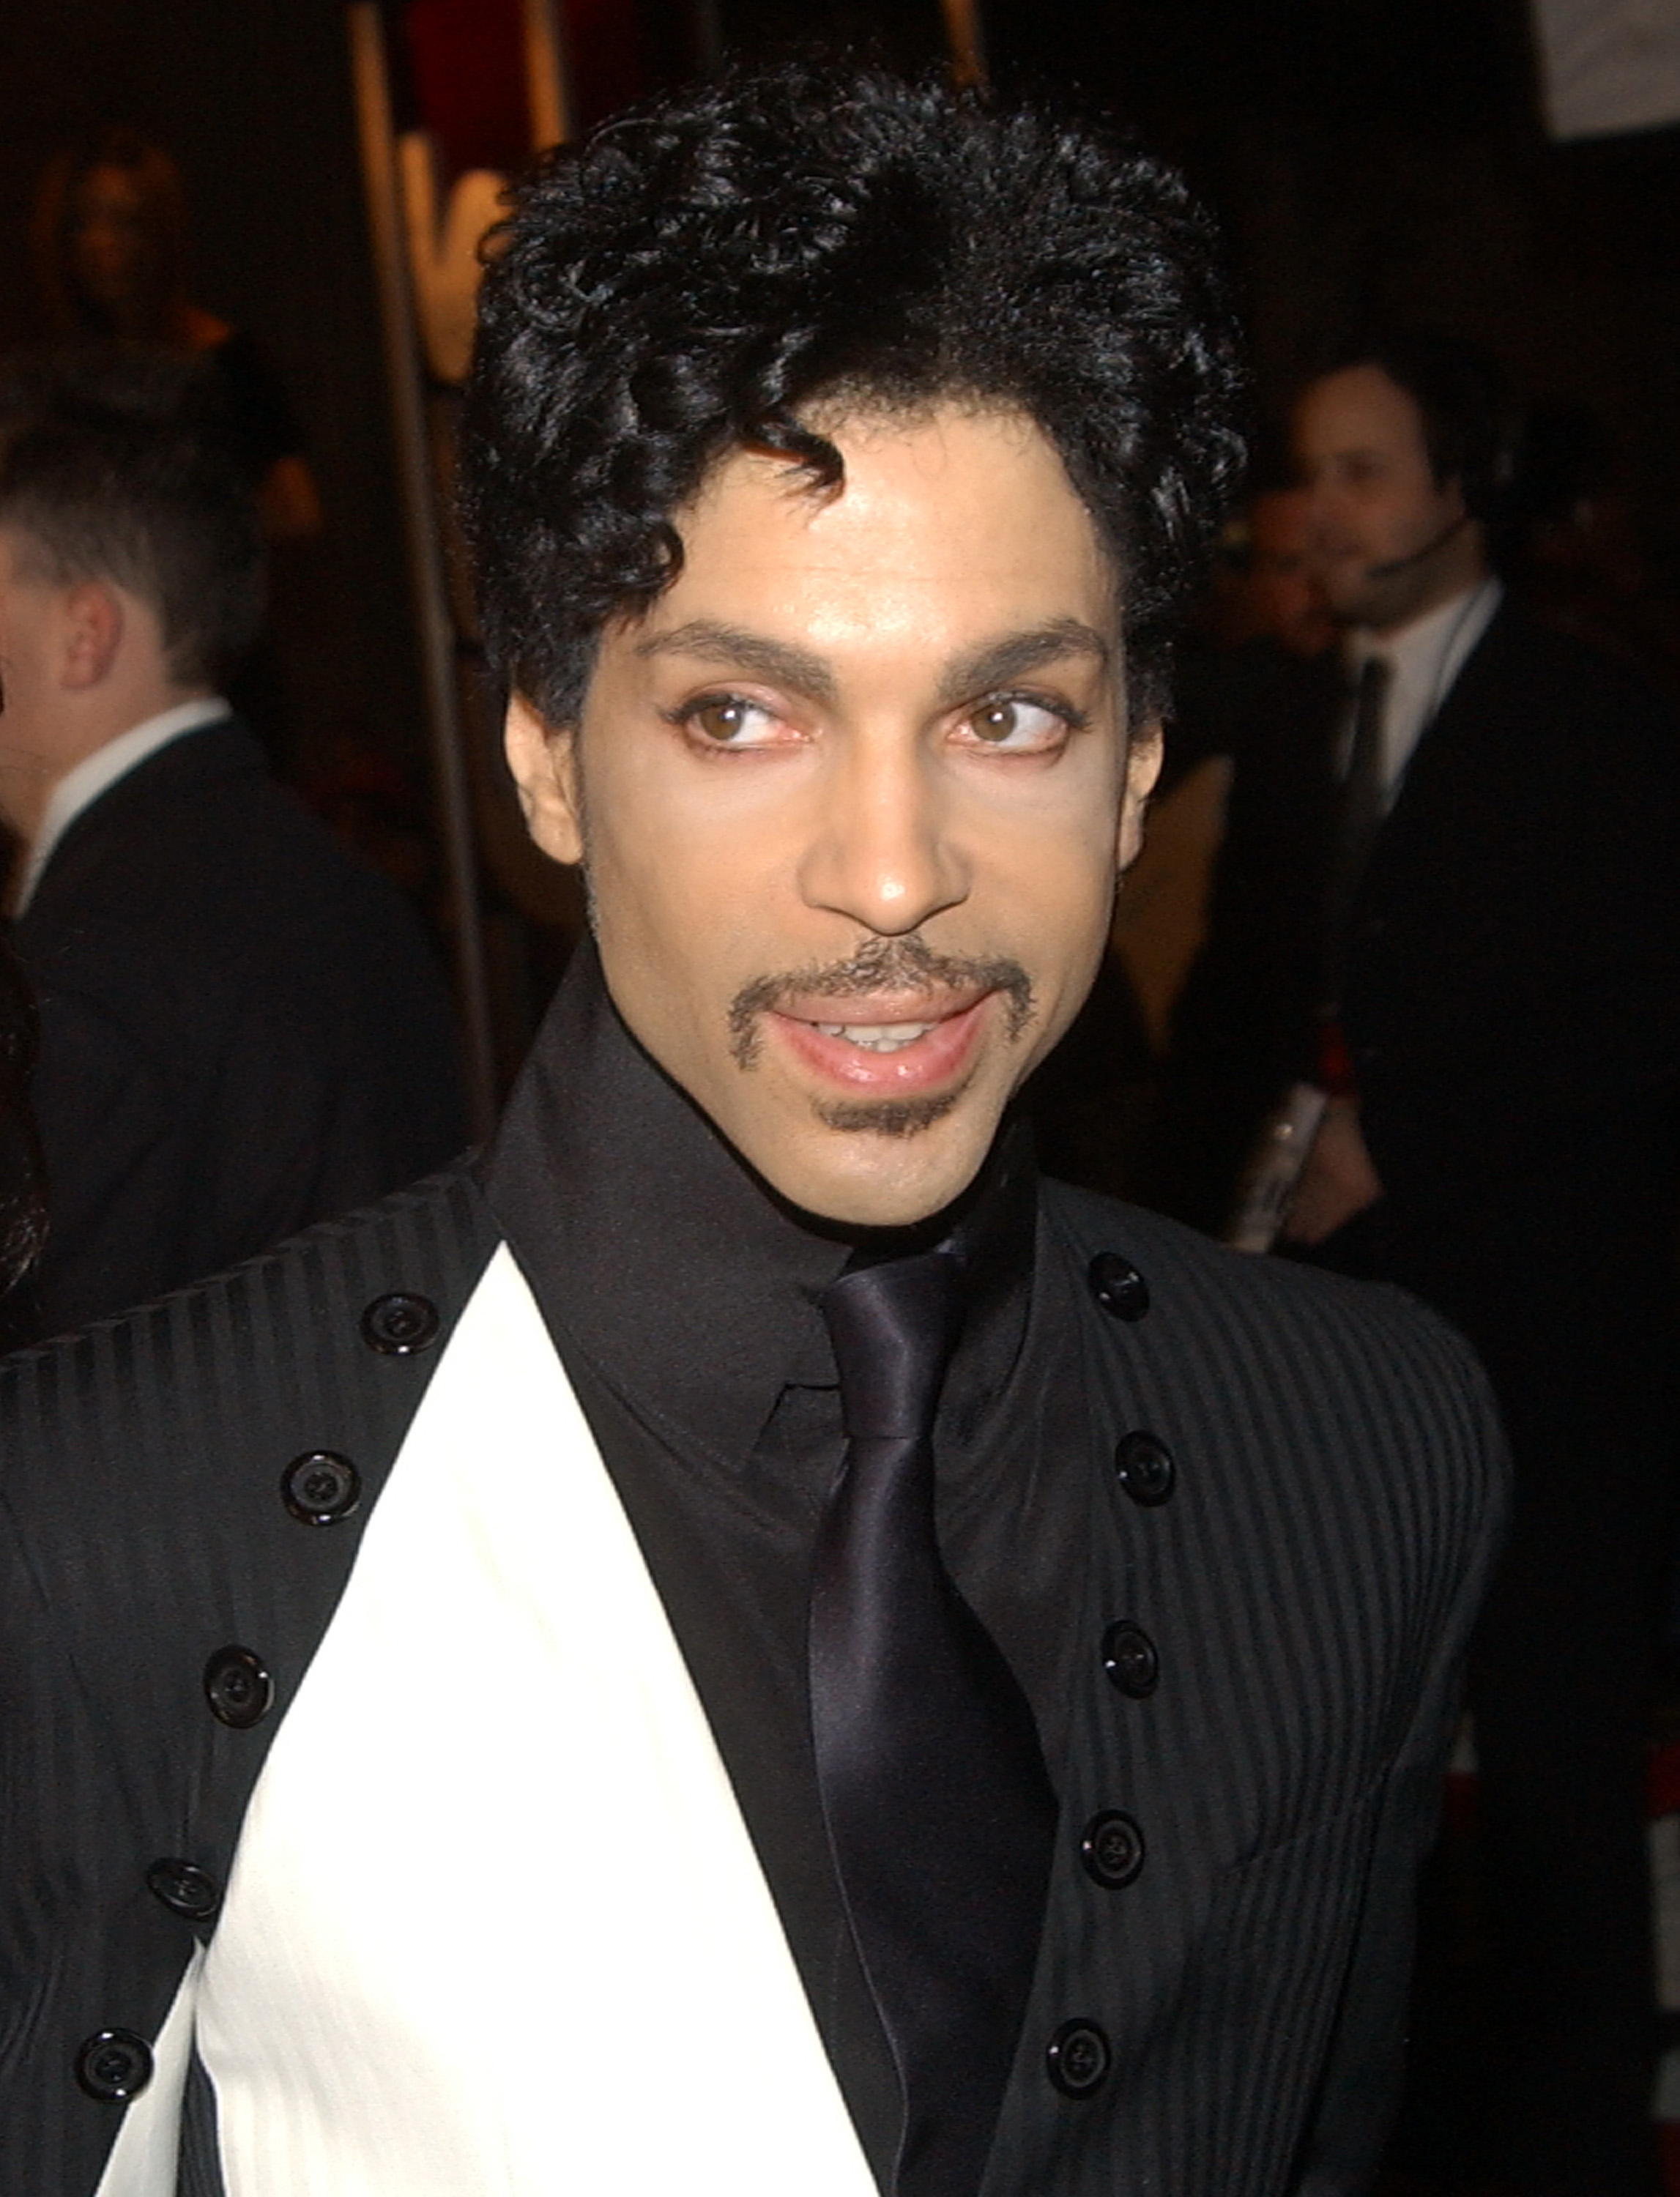 Prince attends the premiere of "Ocean's Twelve" on December 8, 2004 in Los Angeles, California | Source: Getty Images